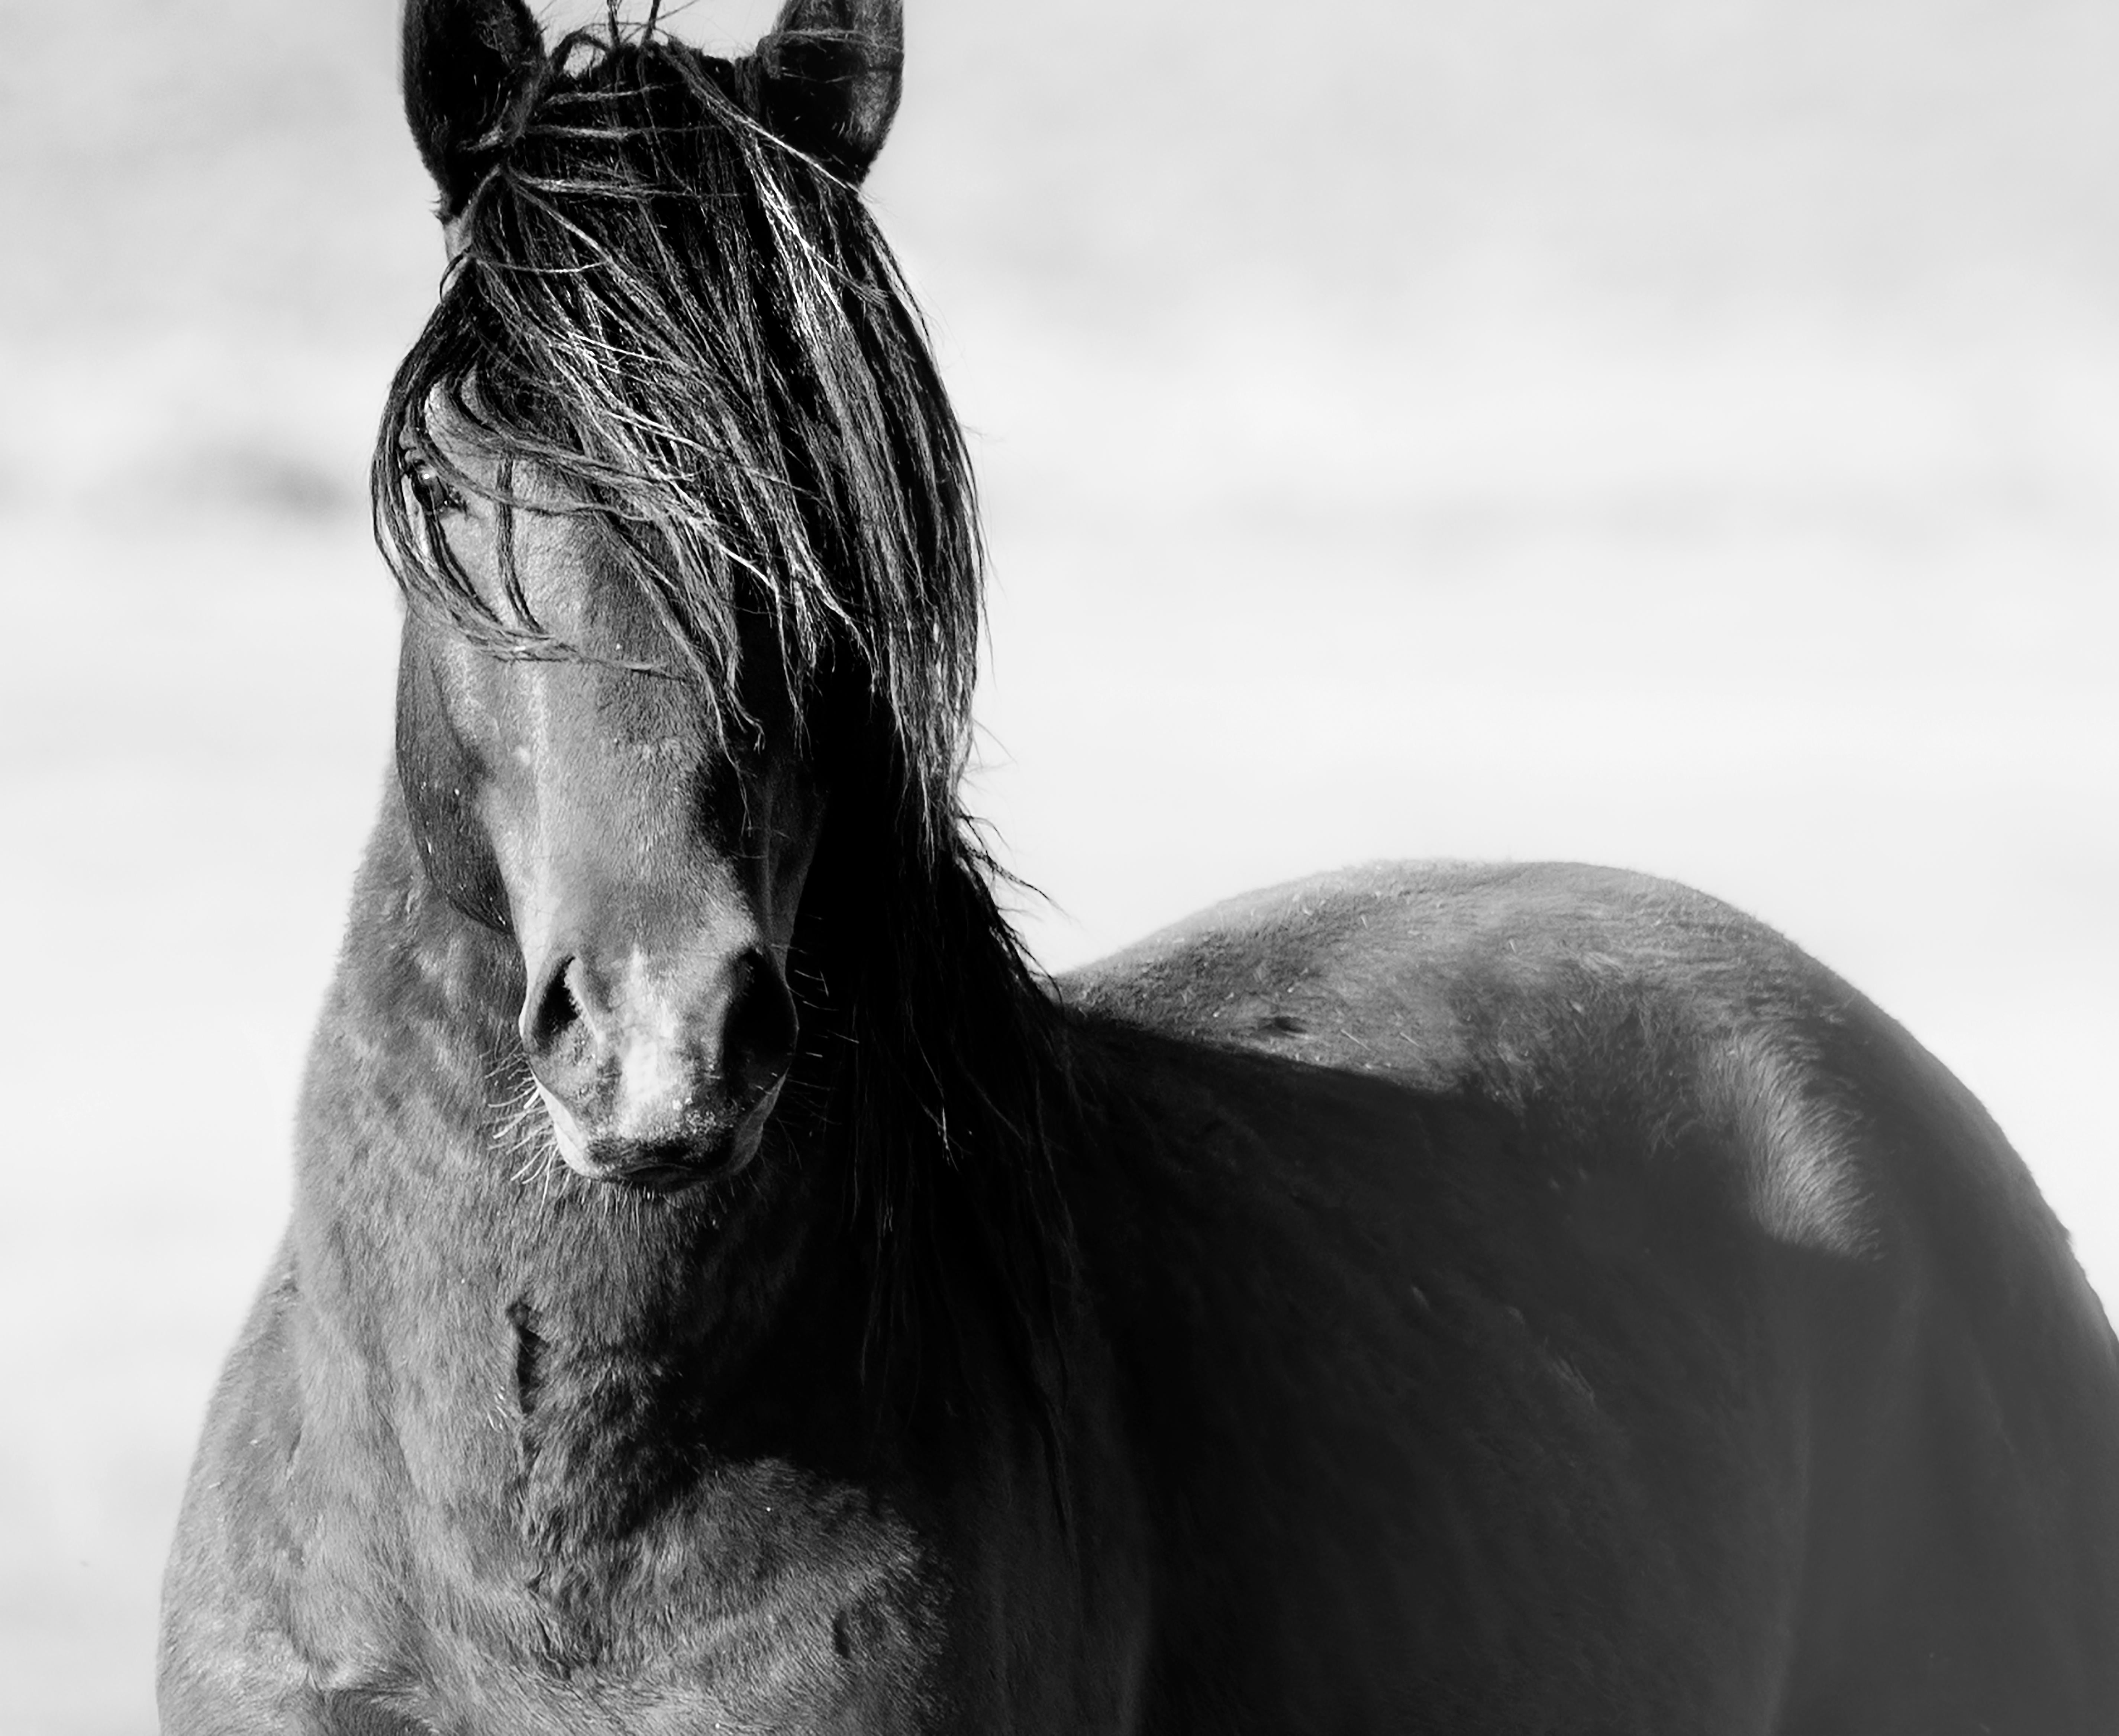 This is a contemporary black and white photograph of a Wild Mustang by Shane Russeck. 
"They represent the ultimate expression of American freedom"
Unsigned print
Printed on archival paper using archival inks
Signed and numbered
Framing available.